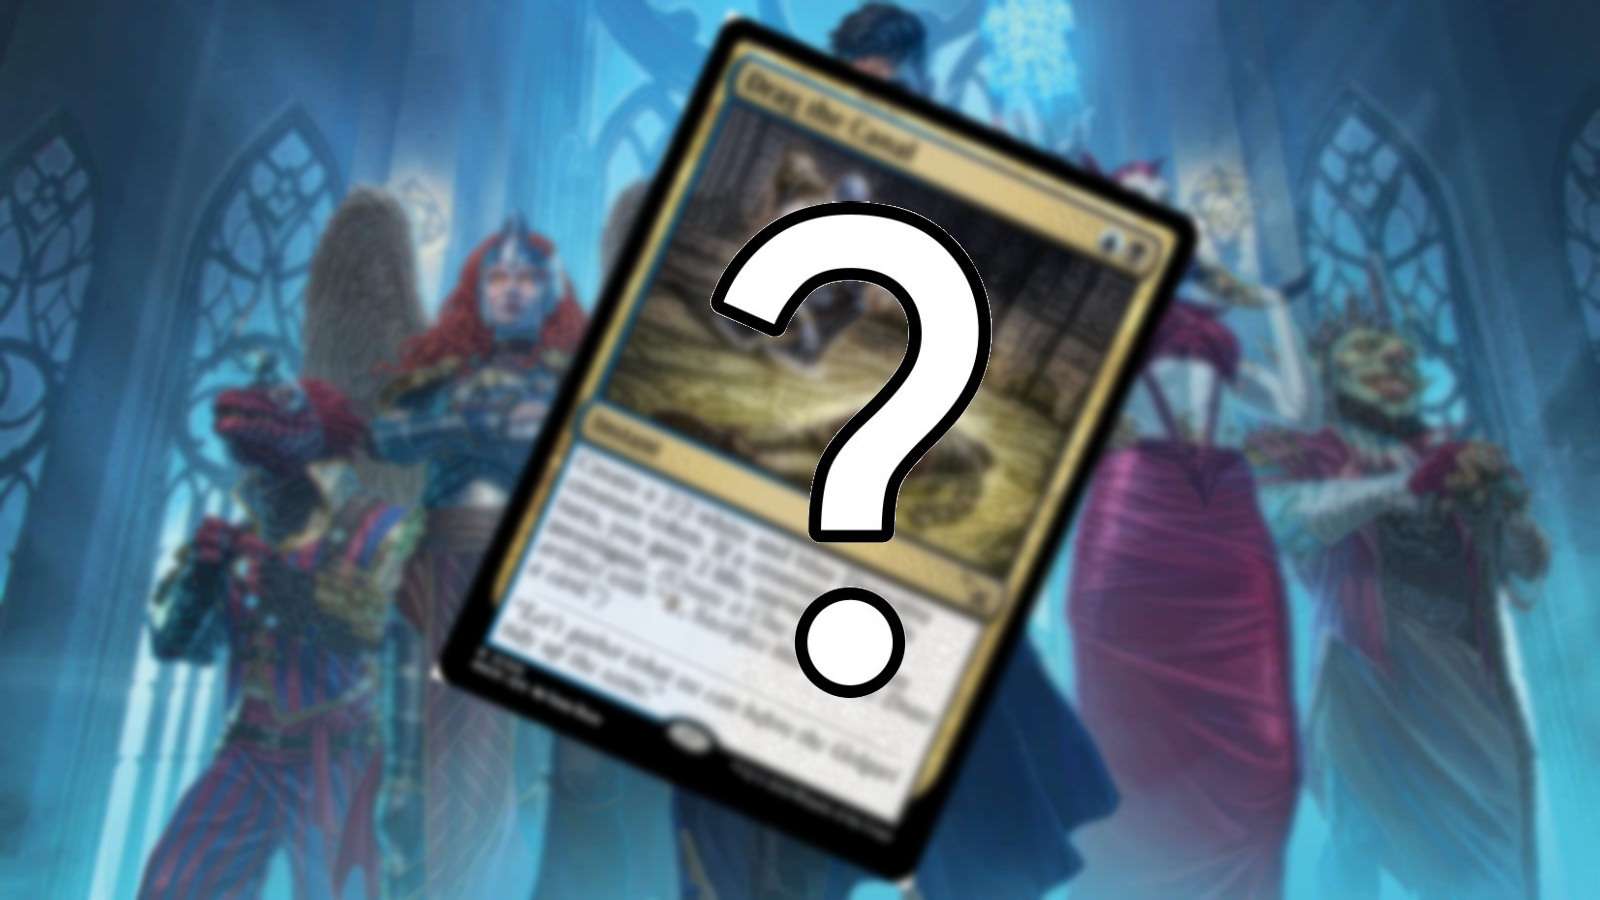 MTG Karlov Manor card reveal and question mark